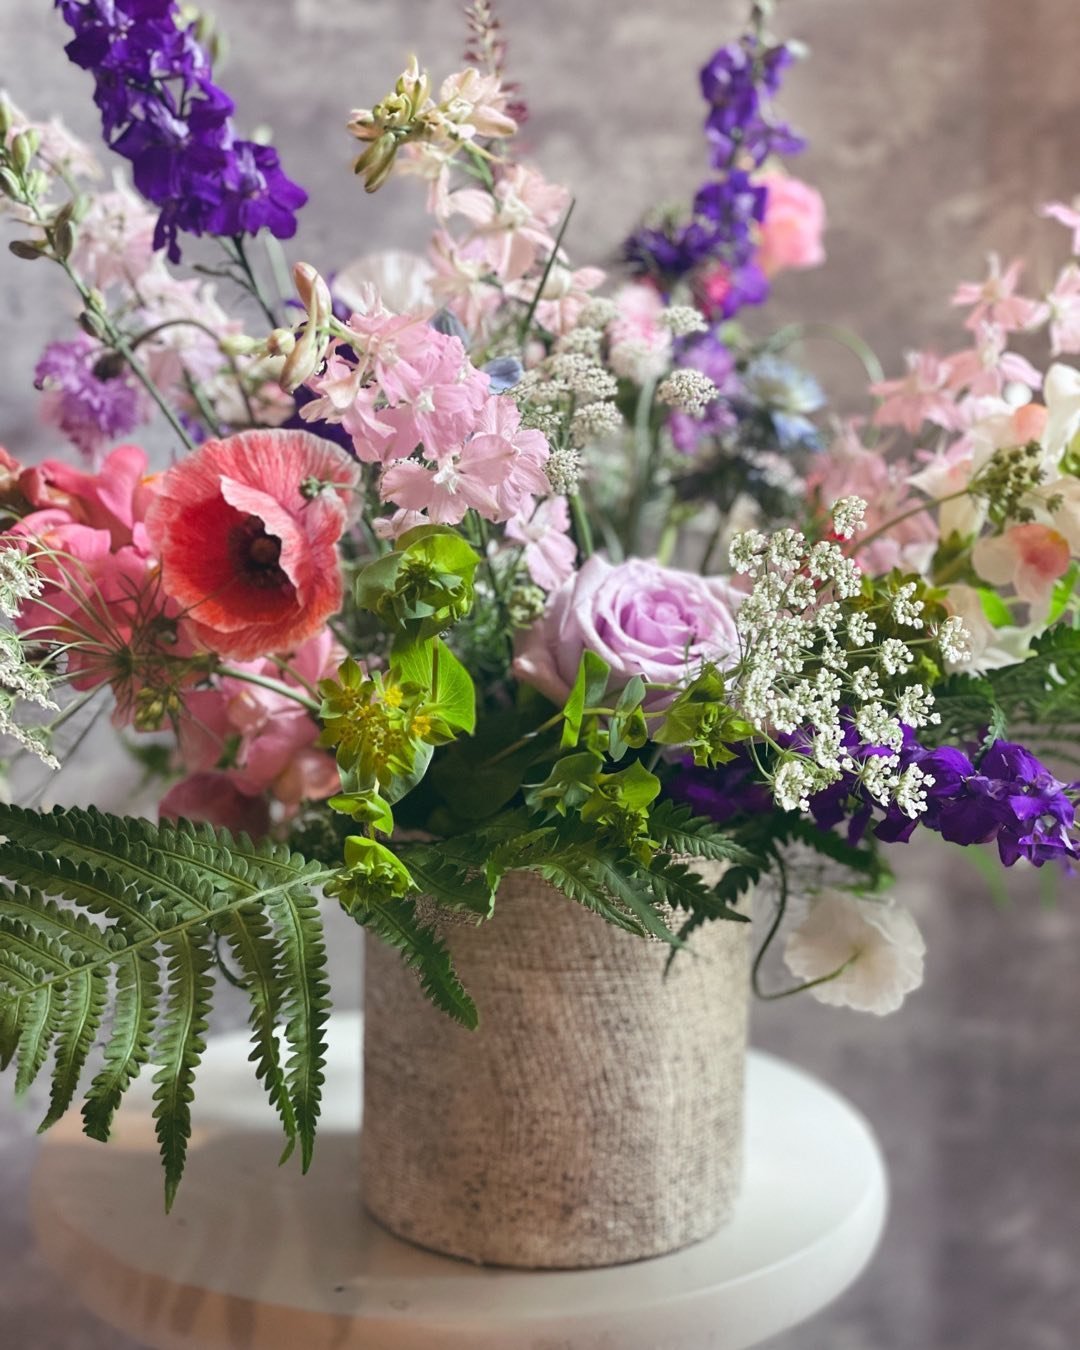 Now taking pre-orders for old-world, super romantic Mother&rsquo;s Day arrangements! Delivery or pick up on Saturday May 11th.  Send a hint!!

Reserve online or link in bio 💕

#mothersday #nashville #mothersdayflowers #mothersdaydeliveries #mothersd